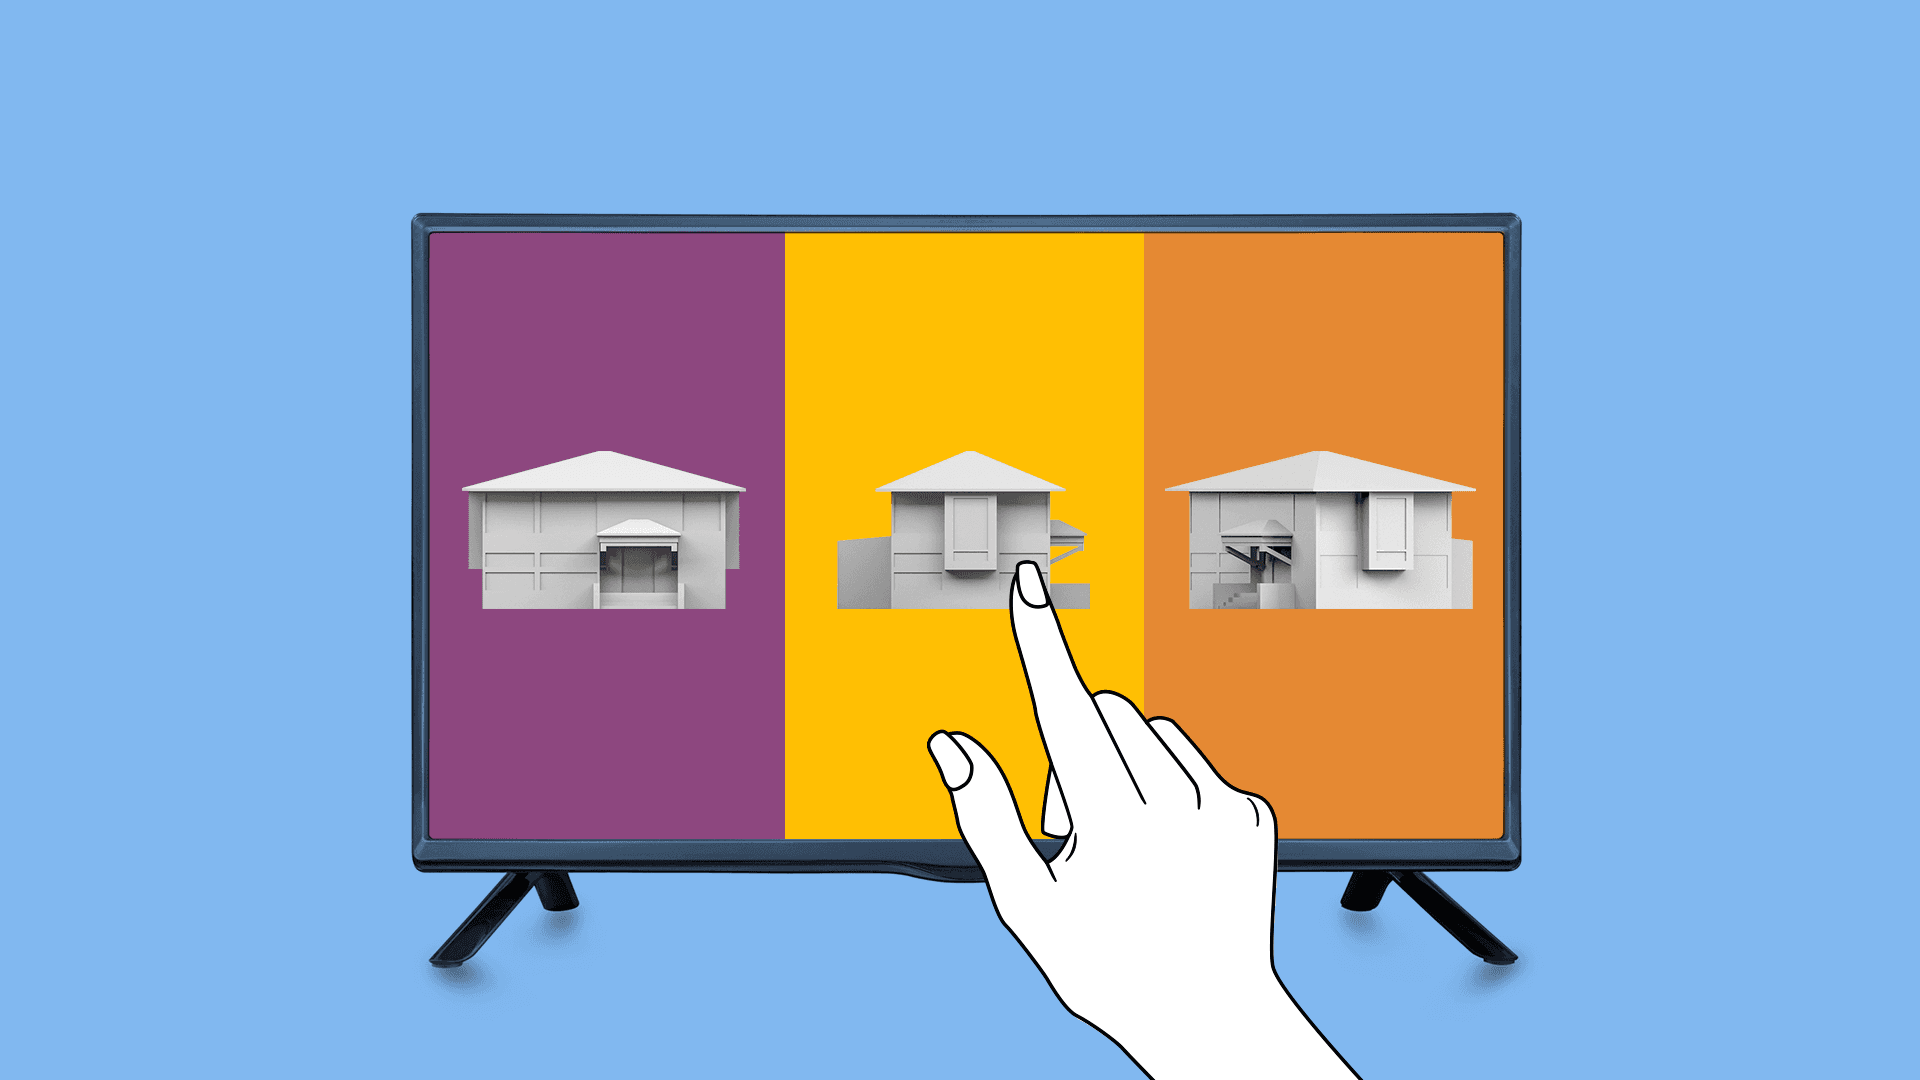 A small tv screen shows three 3d house designs while a hand taps the second design.